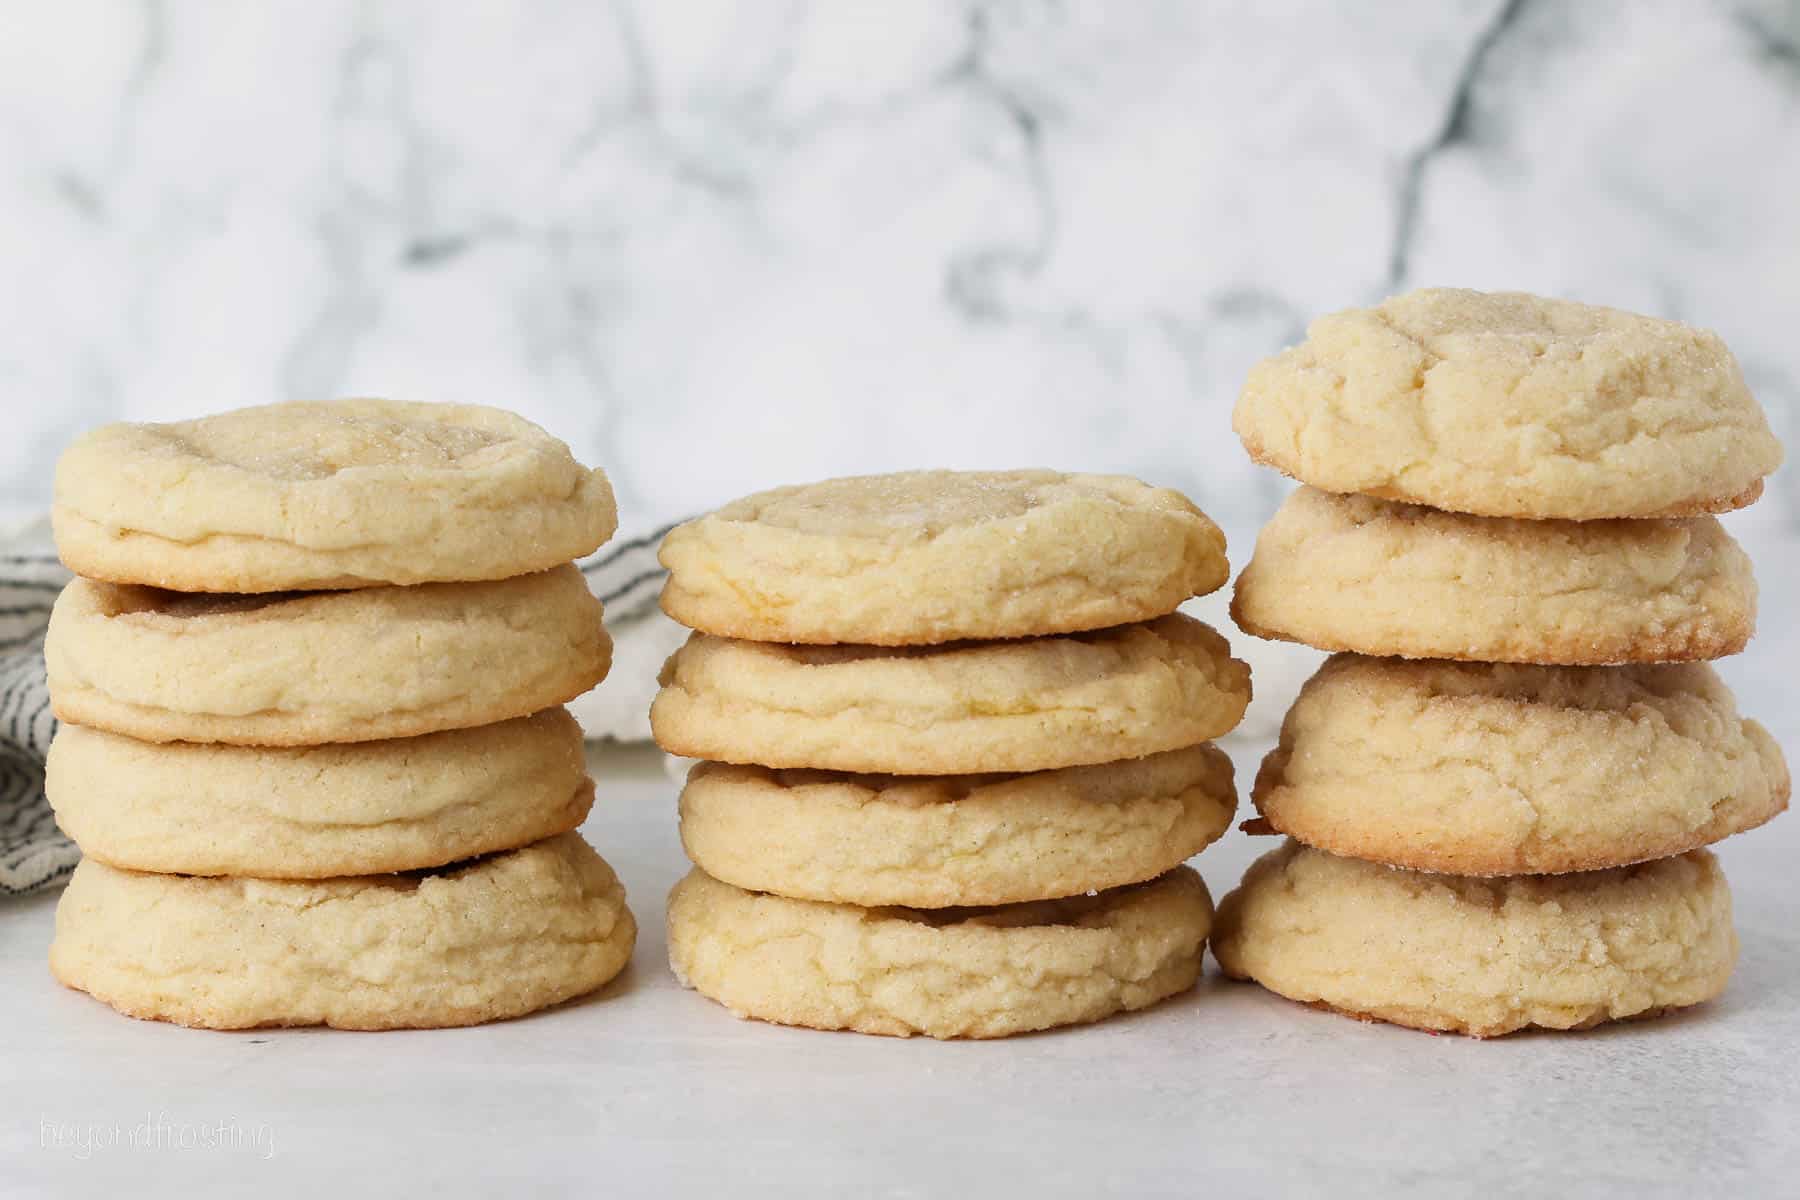 Side view of three stacks of sugar cookies, showing the differences when baked with cream of tartar, lemon juice, or baking powder.